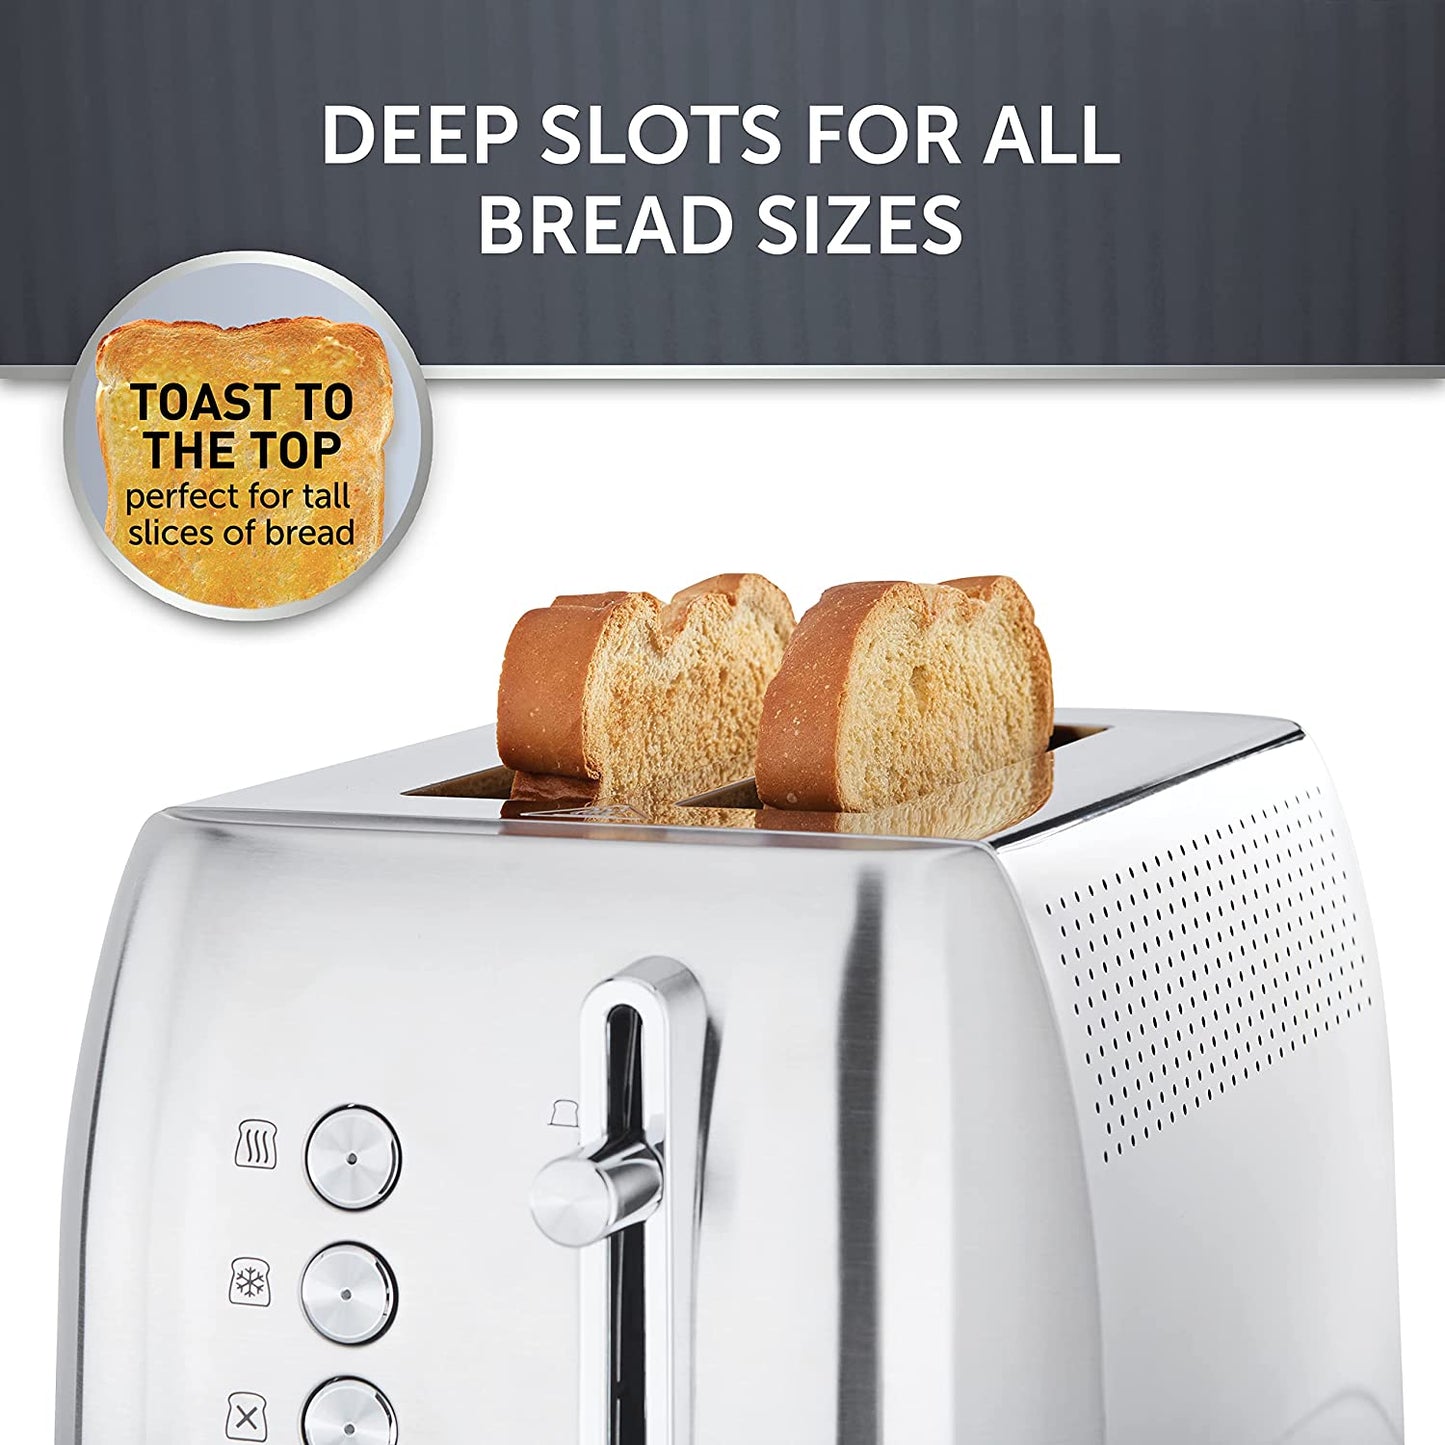 Brushed Stainless Steel Breville 2 Slice Toaster Edge Collection (VTT981R)